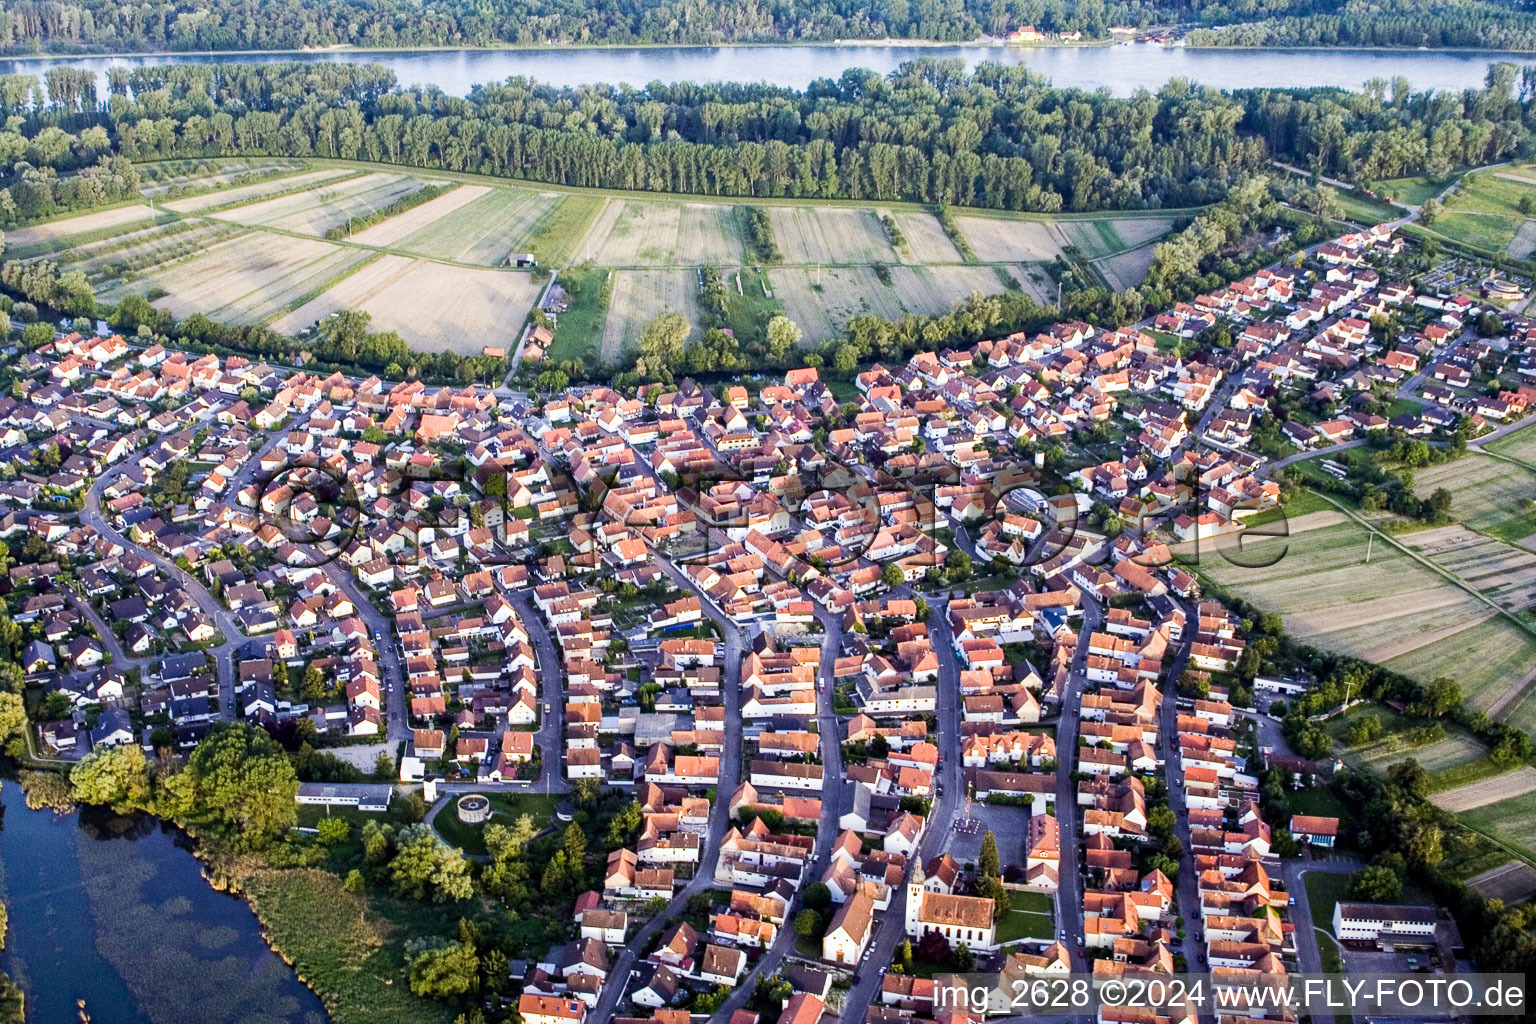 Aerial view of Village on the river bank areas of the Rhine river in Neuburg am Rhein in the state Rhineland-Palatinate, Germany